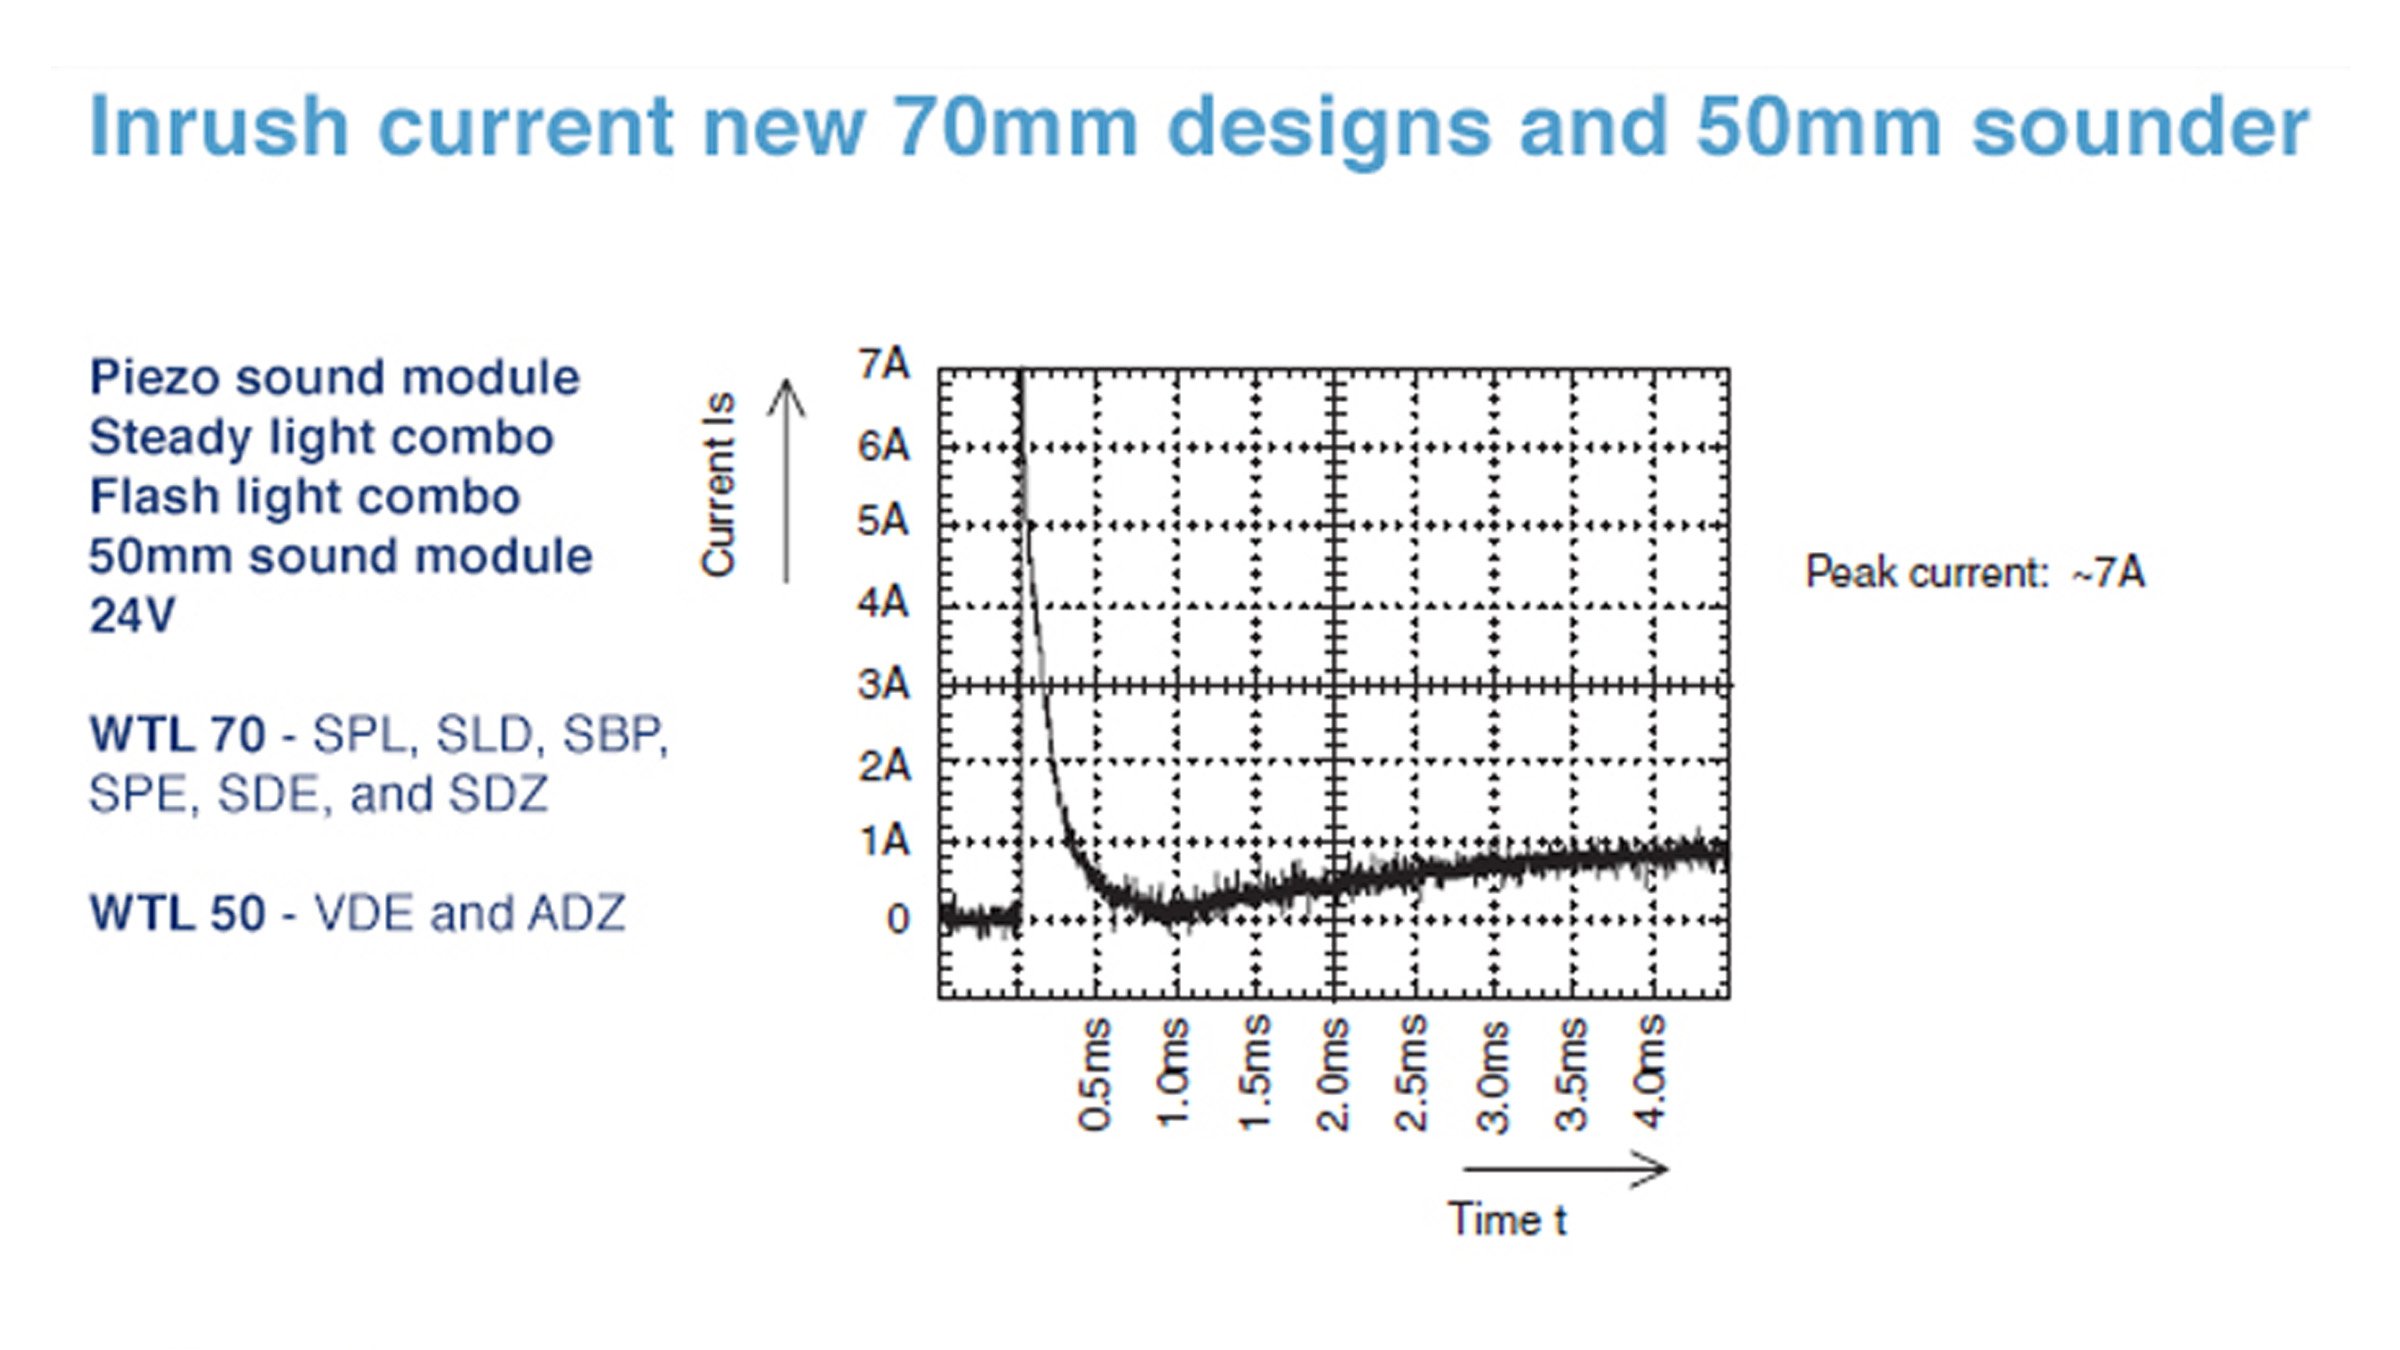 Auer Signal 50mm and 70mm Inrush Current chart for sounder